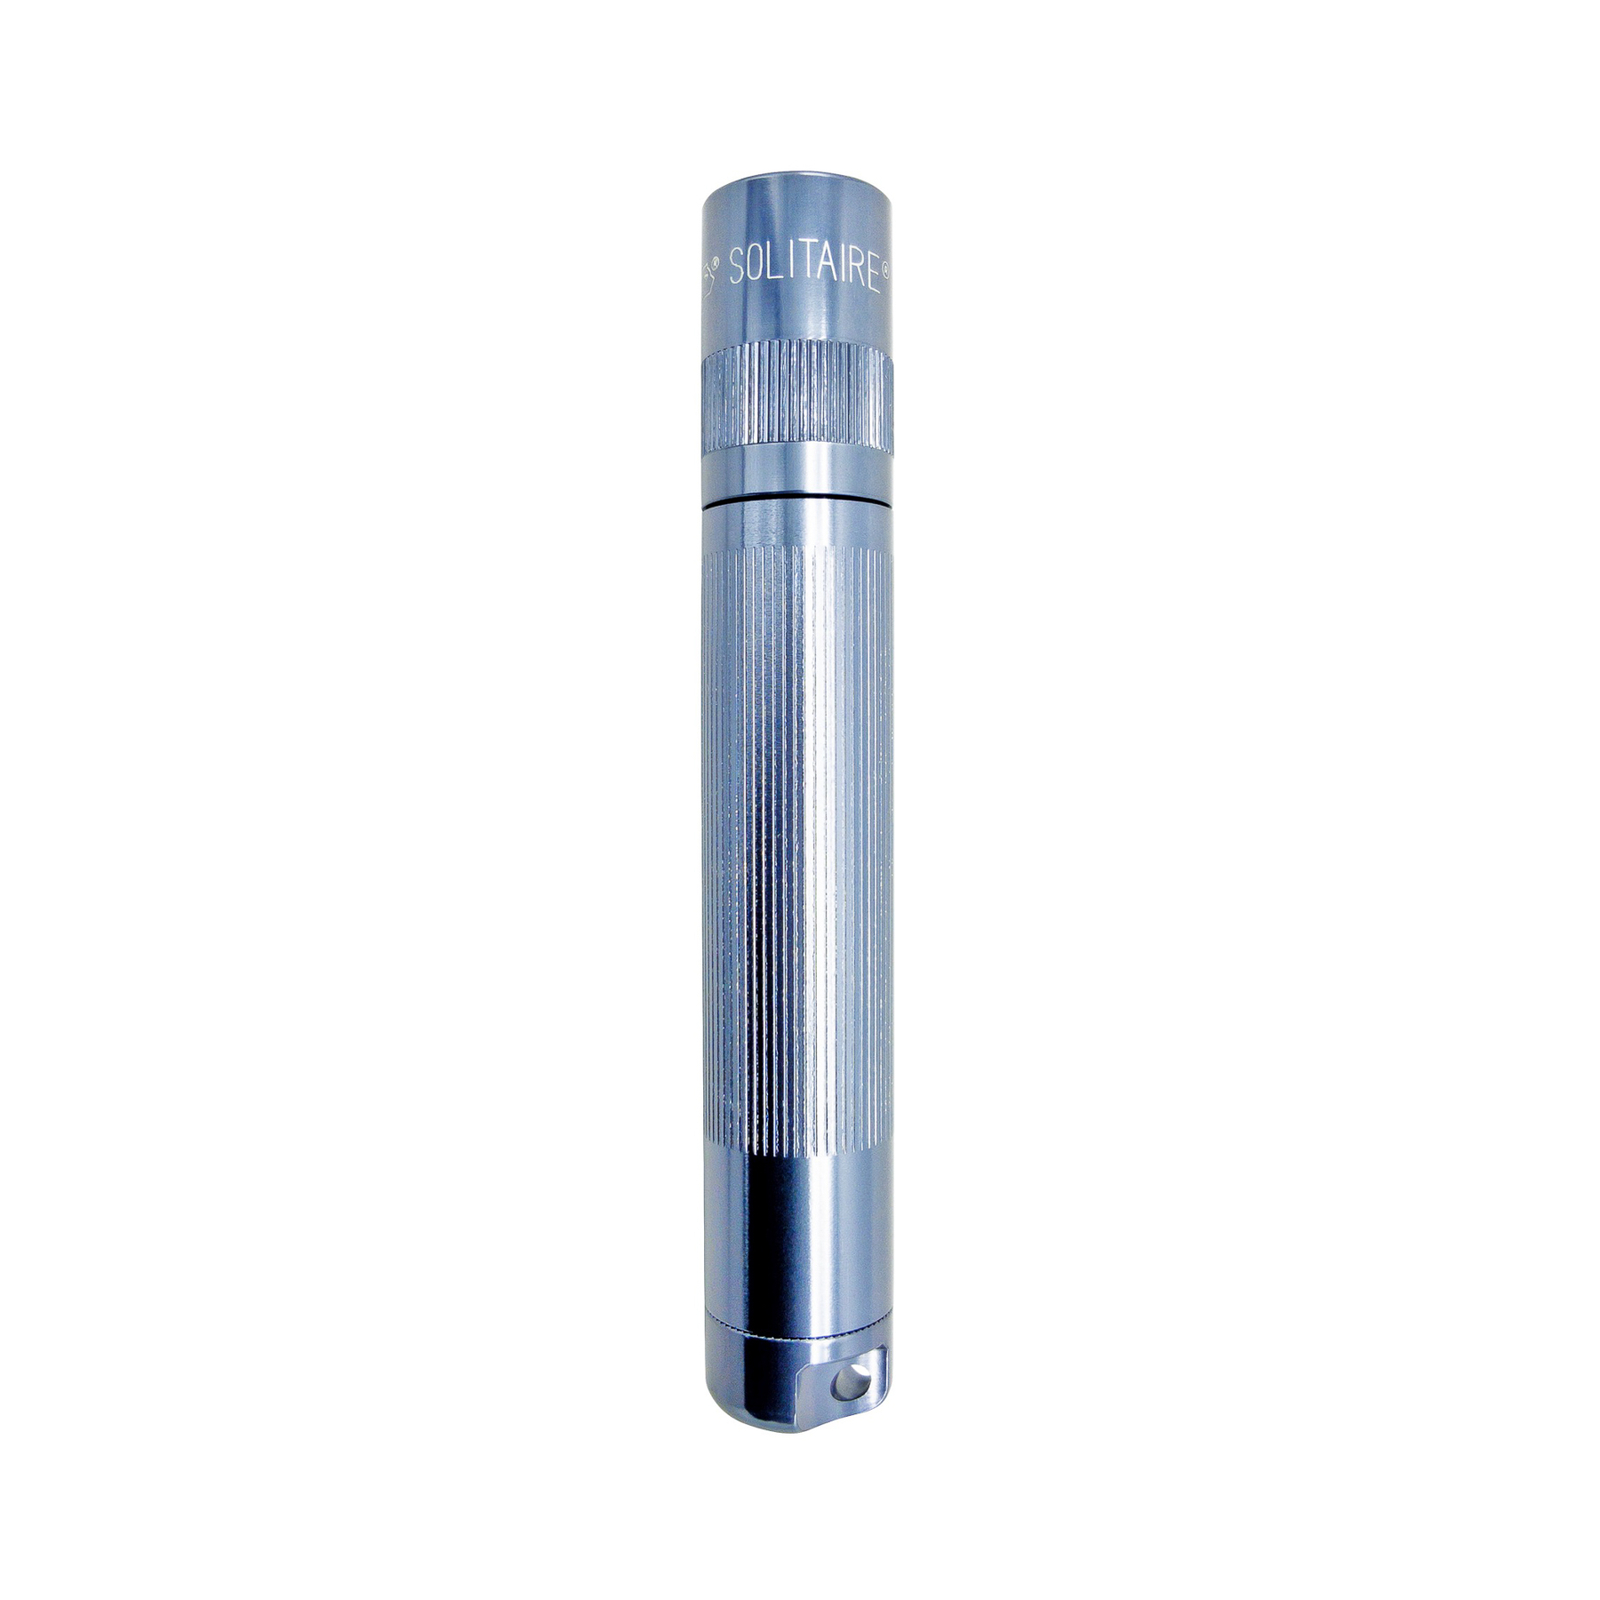 Lanterna LED Maglite Solitaire, 1 Cell AAA, cinzento